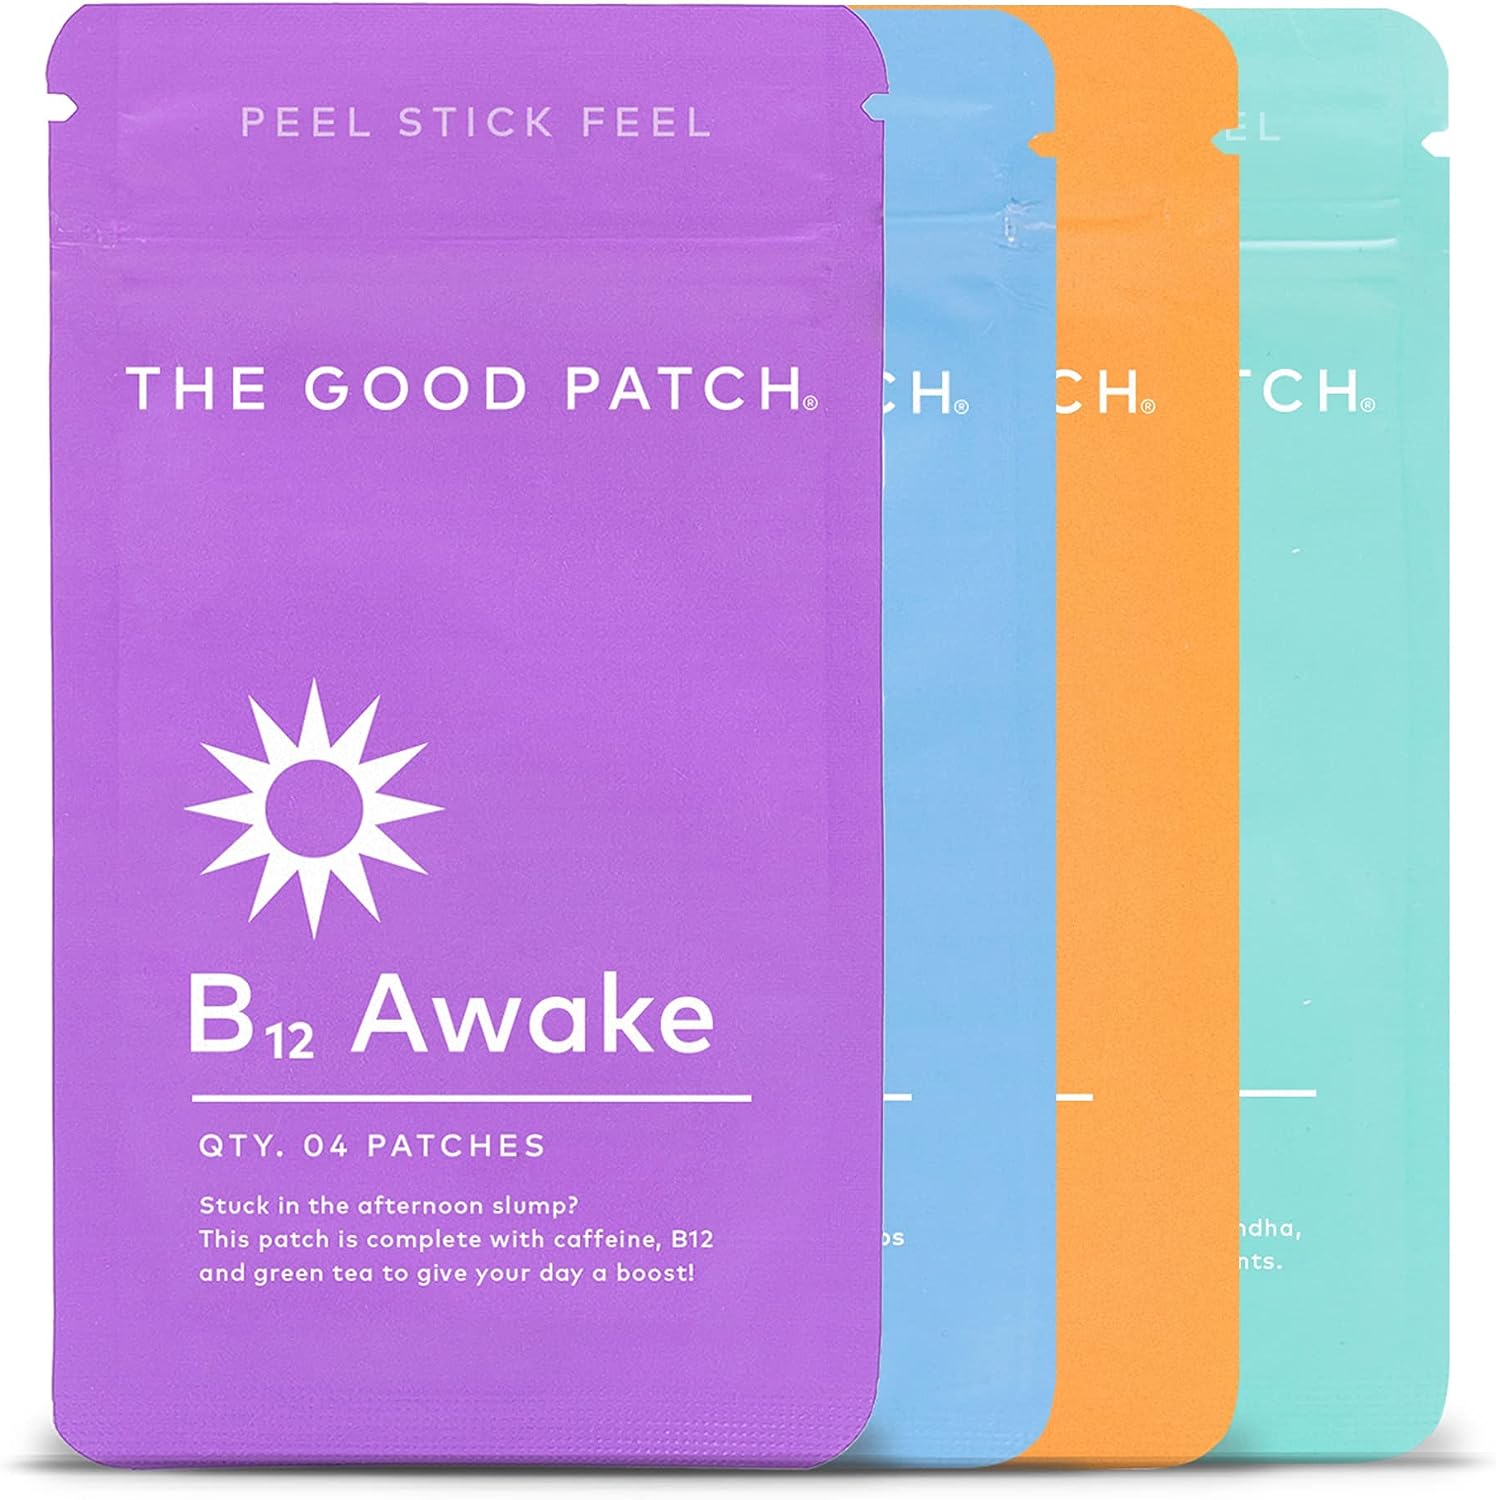 La Mend The Good Patch The Vital Patches Mixed Bundle. Variety Set Includes B12 Awake, Dream, Rescue and Relax (16 Total Patches)